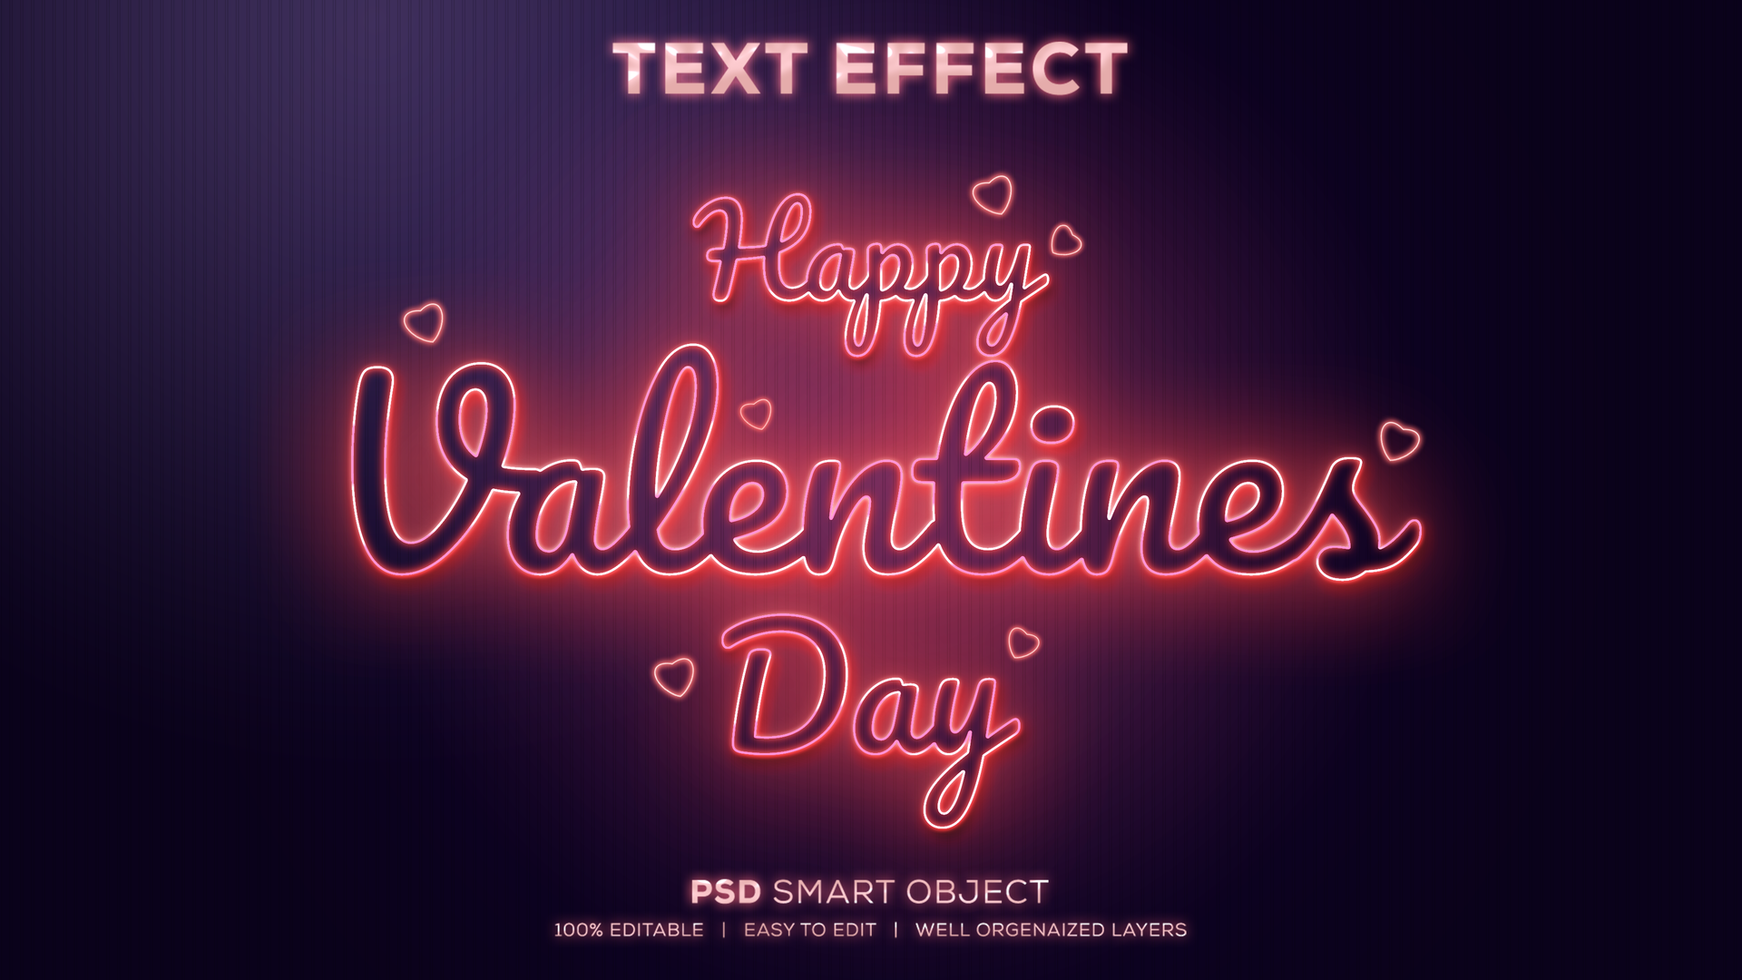 Happy Valentines Day PSD Text Effect